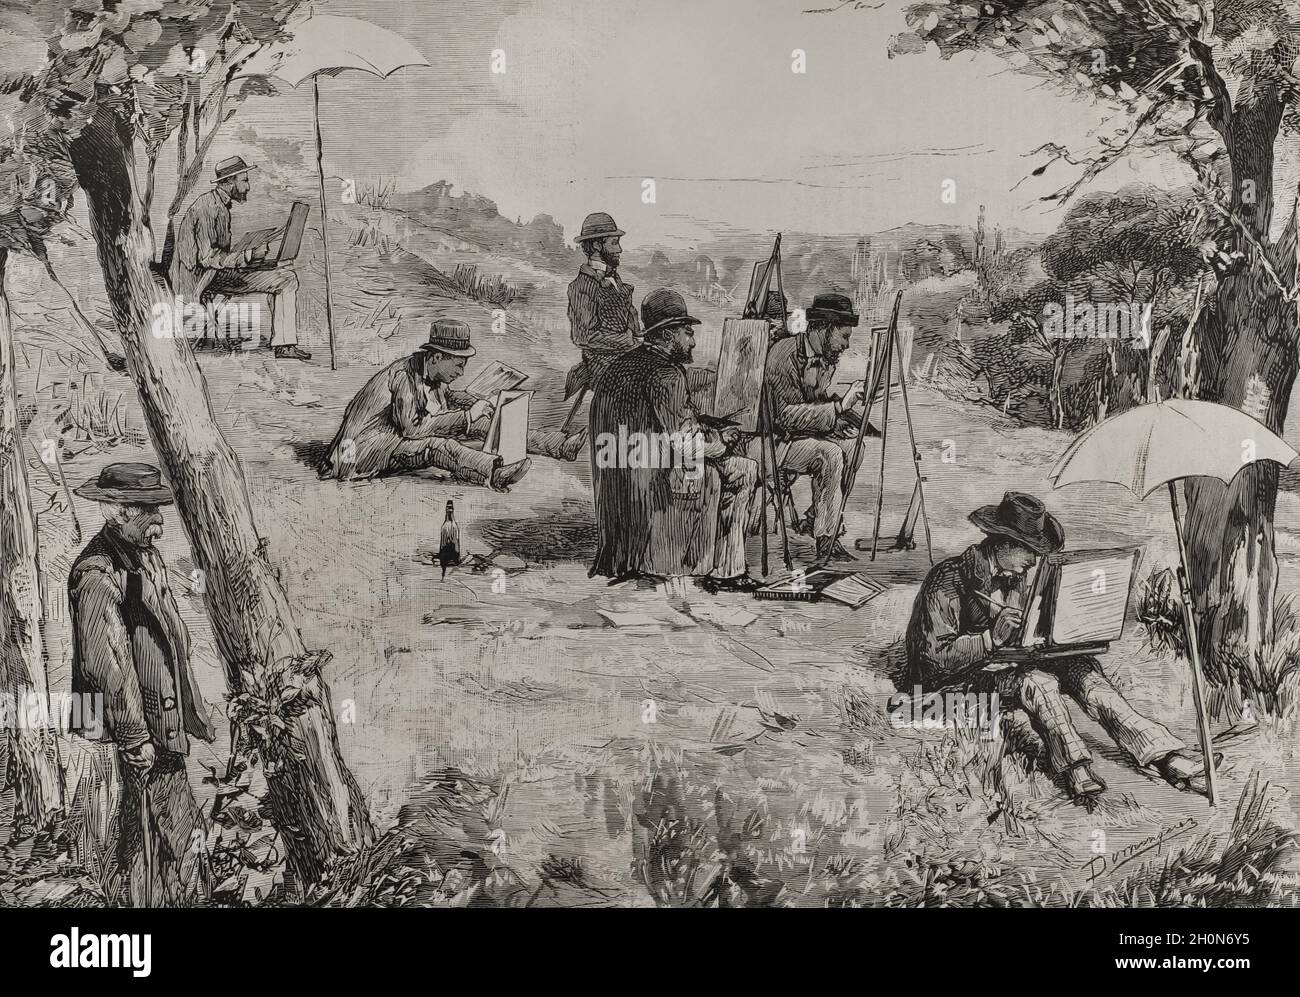 History of Spain. Madrid. Rome pension opponents practicing natural exercises in the vicinity of the San Fernando Bridge. Drawing by Manuel Domínguez. Engraving. La Ilustración Española y Americana, 1878. Stock Photo